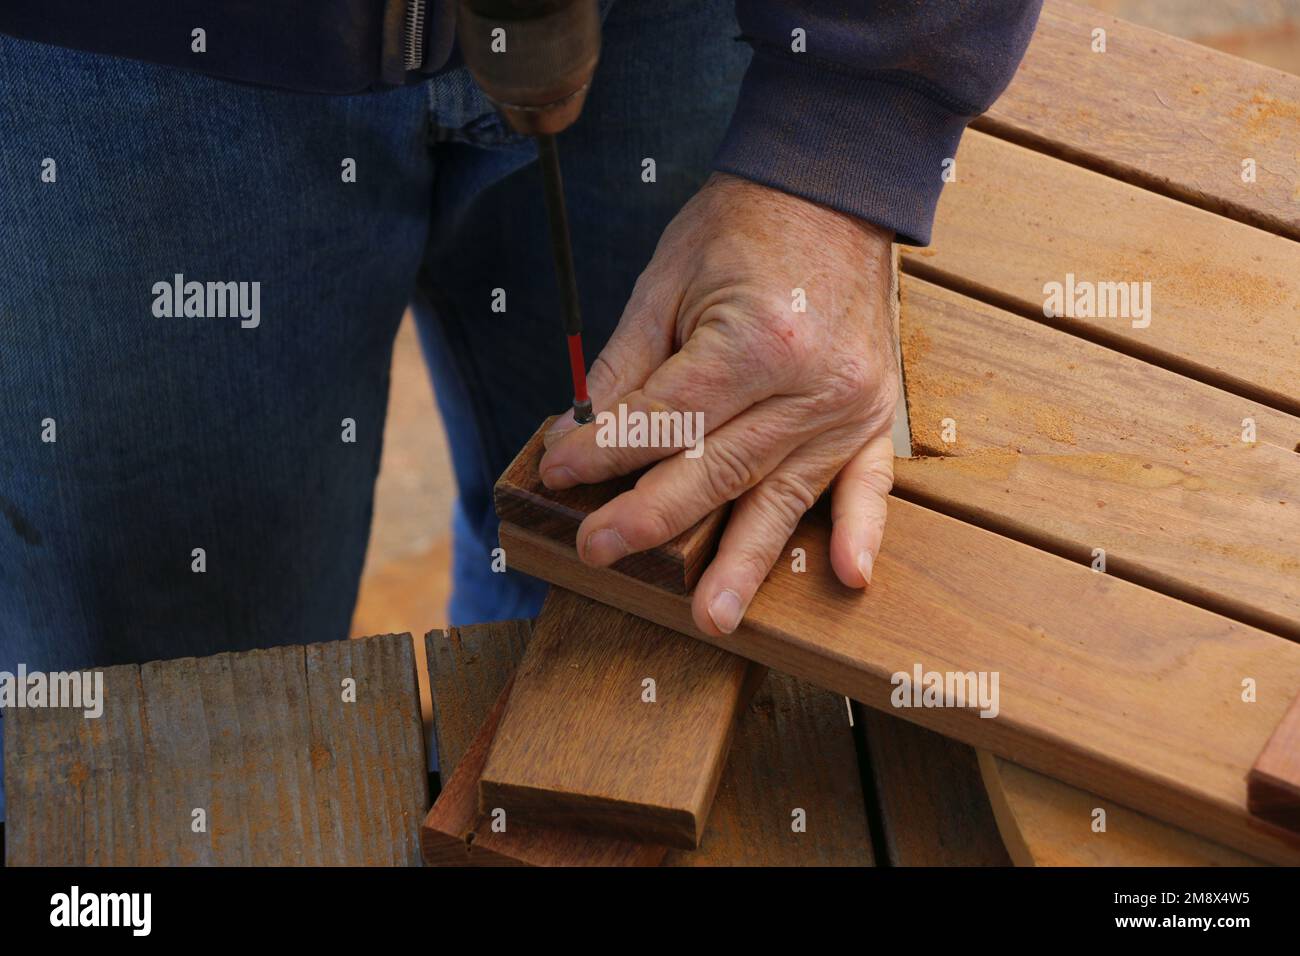 Close up of the hands of a senior man who is using a drill bit to complete a woodworking project to build flooring. Stock Photo